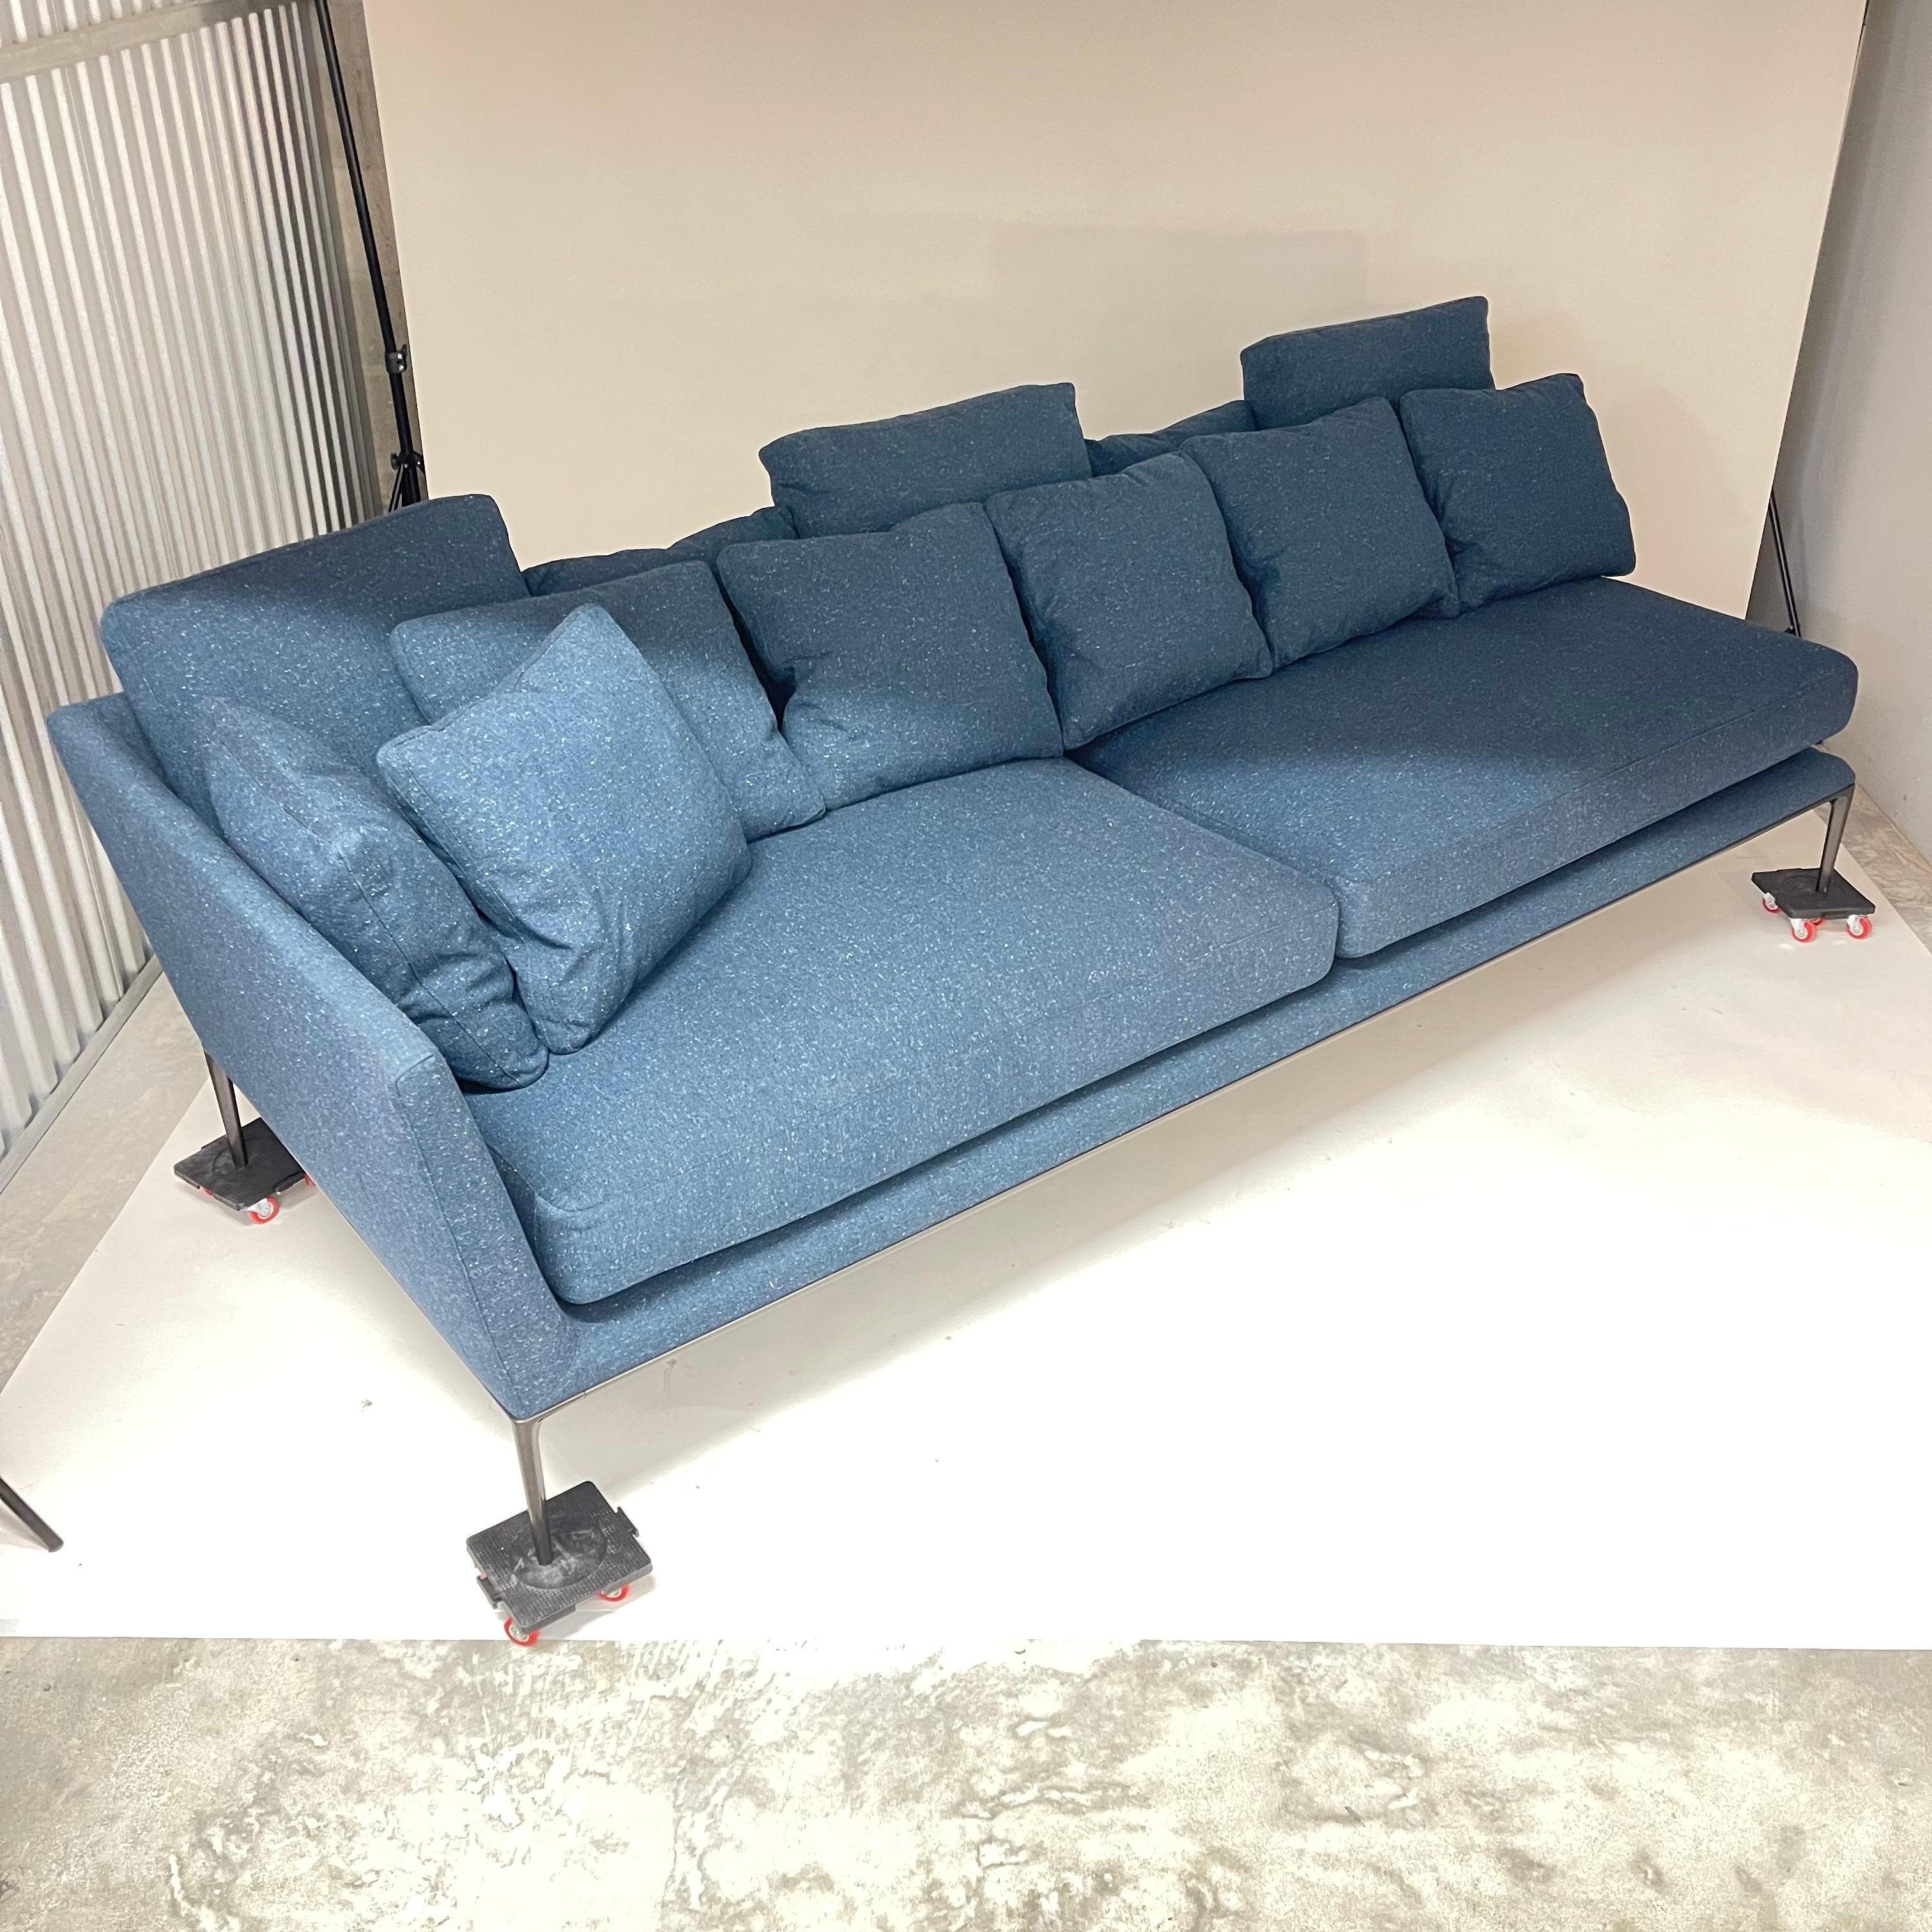 Stunning left arm right facing sofa chaise lounge with two seat cushions and twelve back cushions for extra comfort that can be arranged in numerous combinations. Rendered in blue tweed fabric (Edit 420 dark blue with camel accents) with pewter